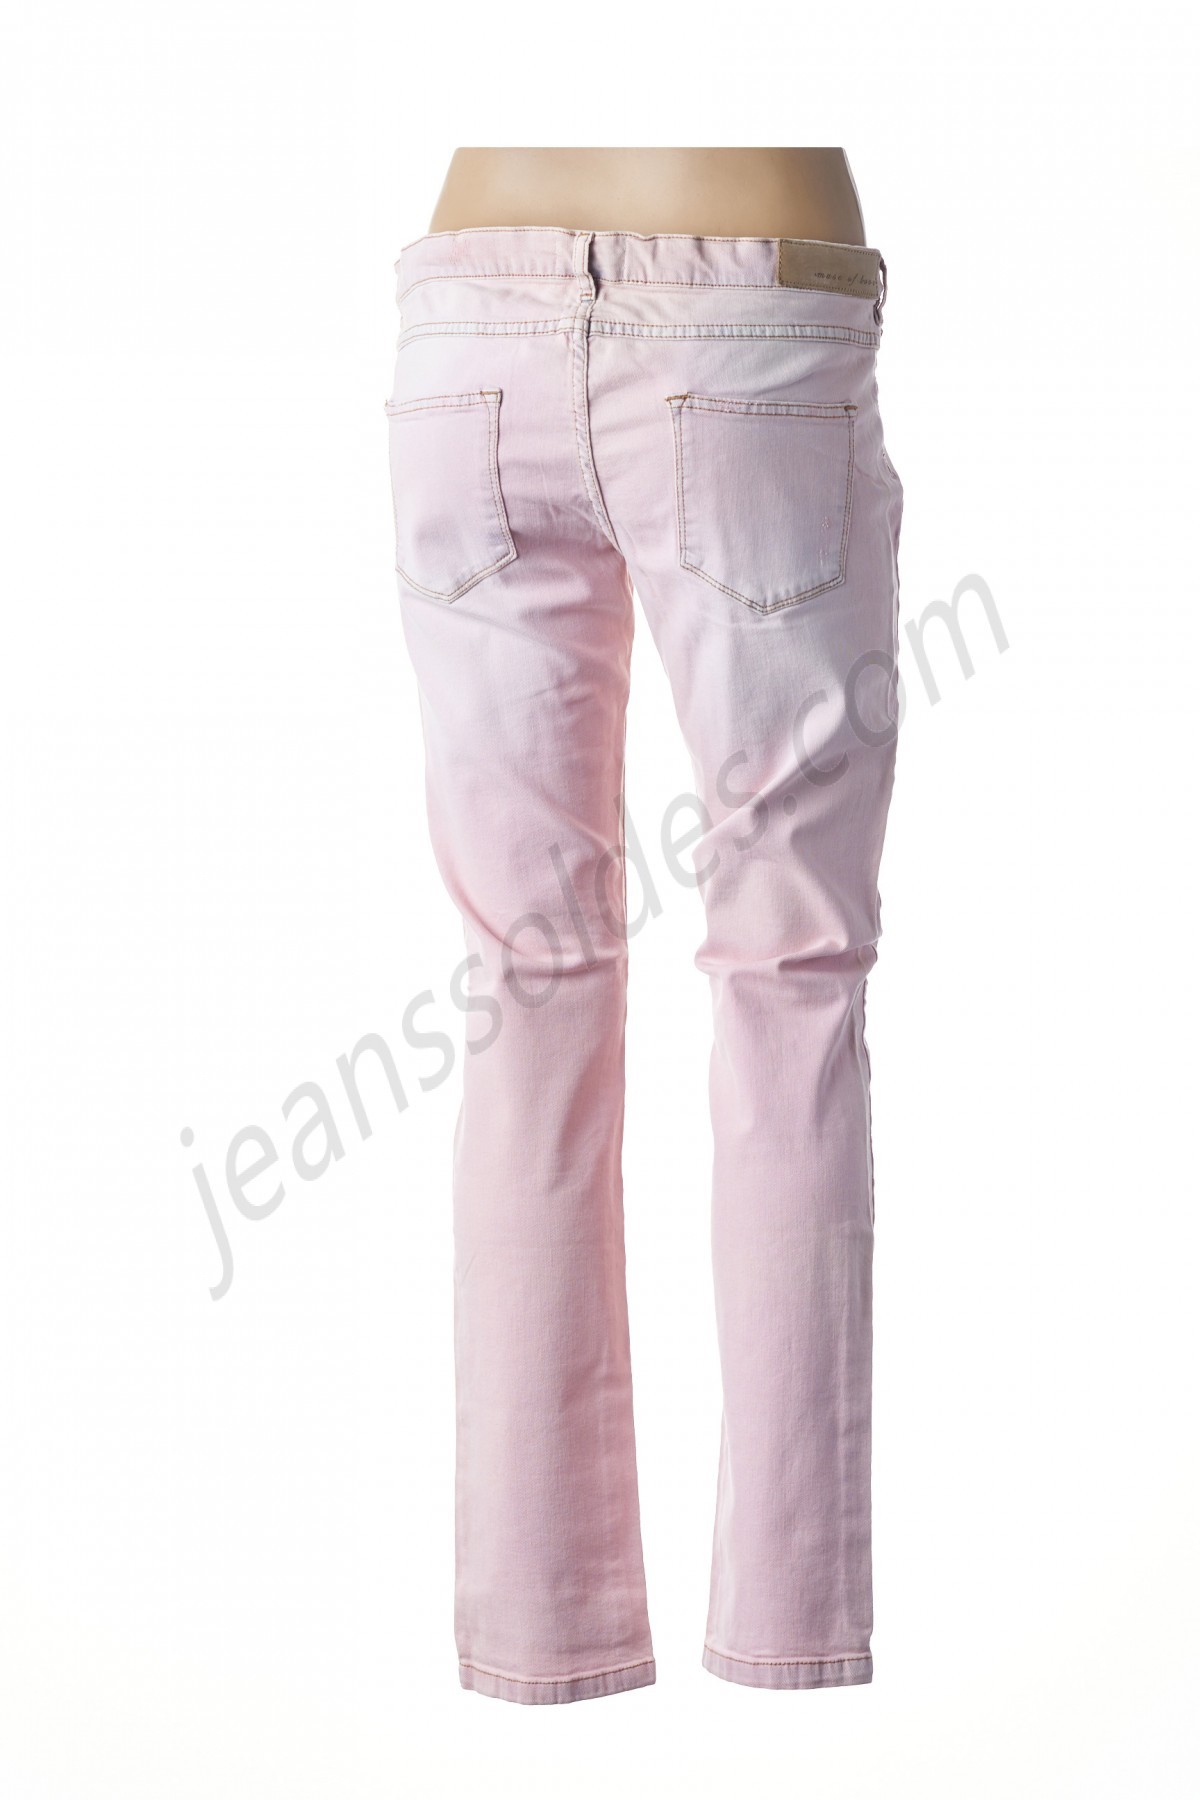 muse of love-Jeans coupe slim prix d’amis - -1